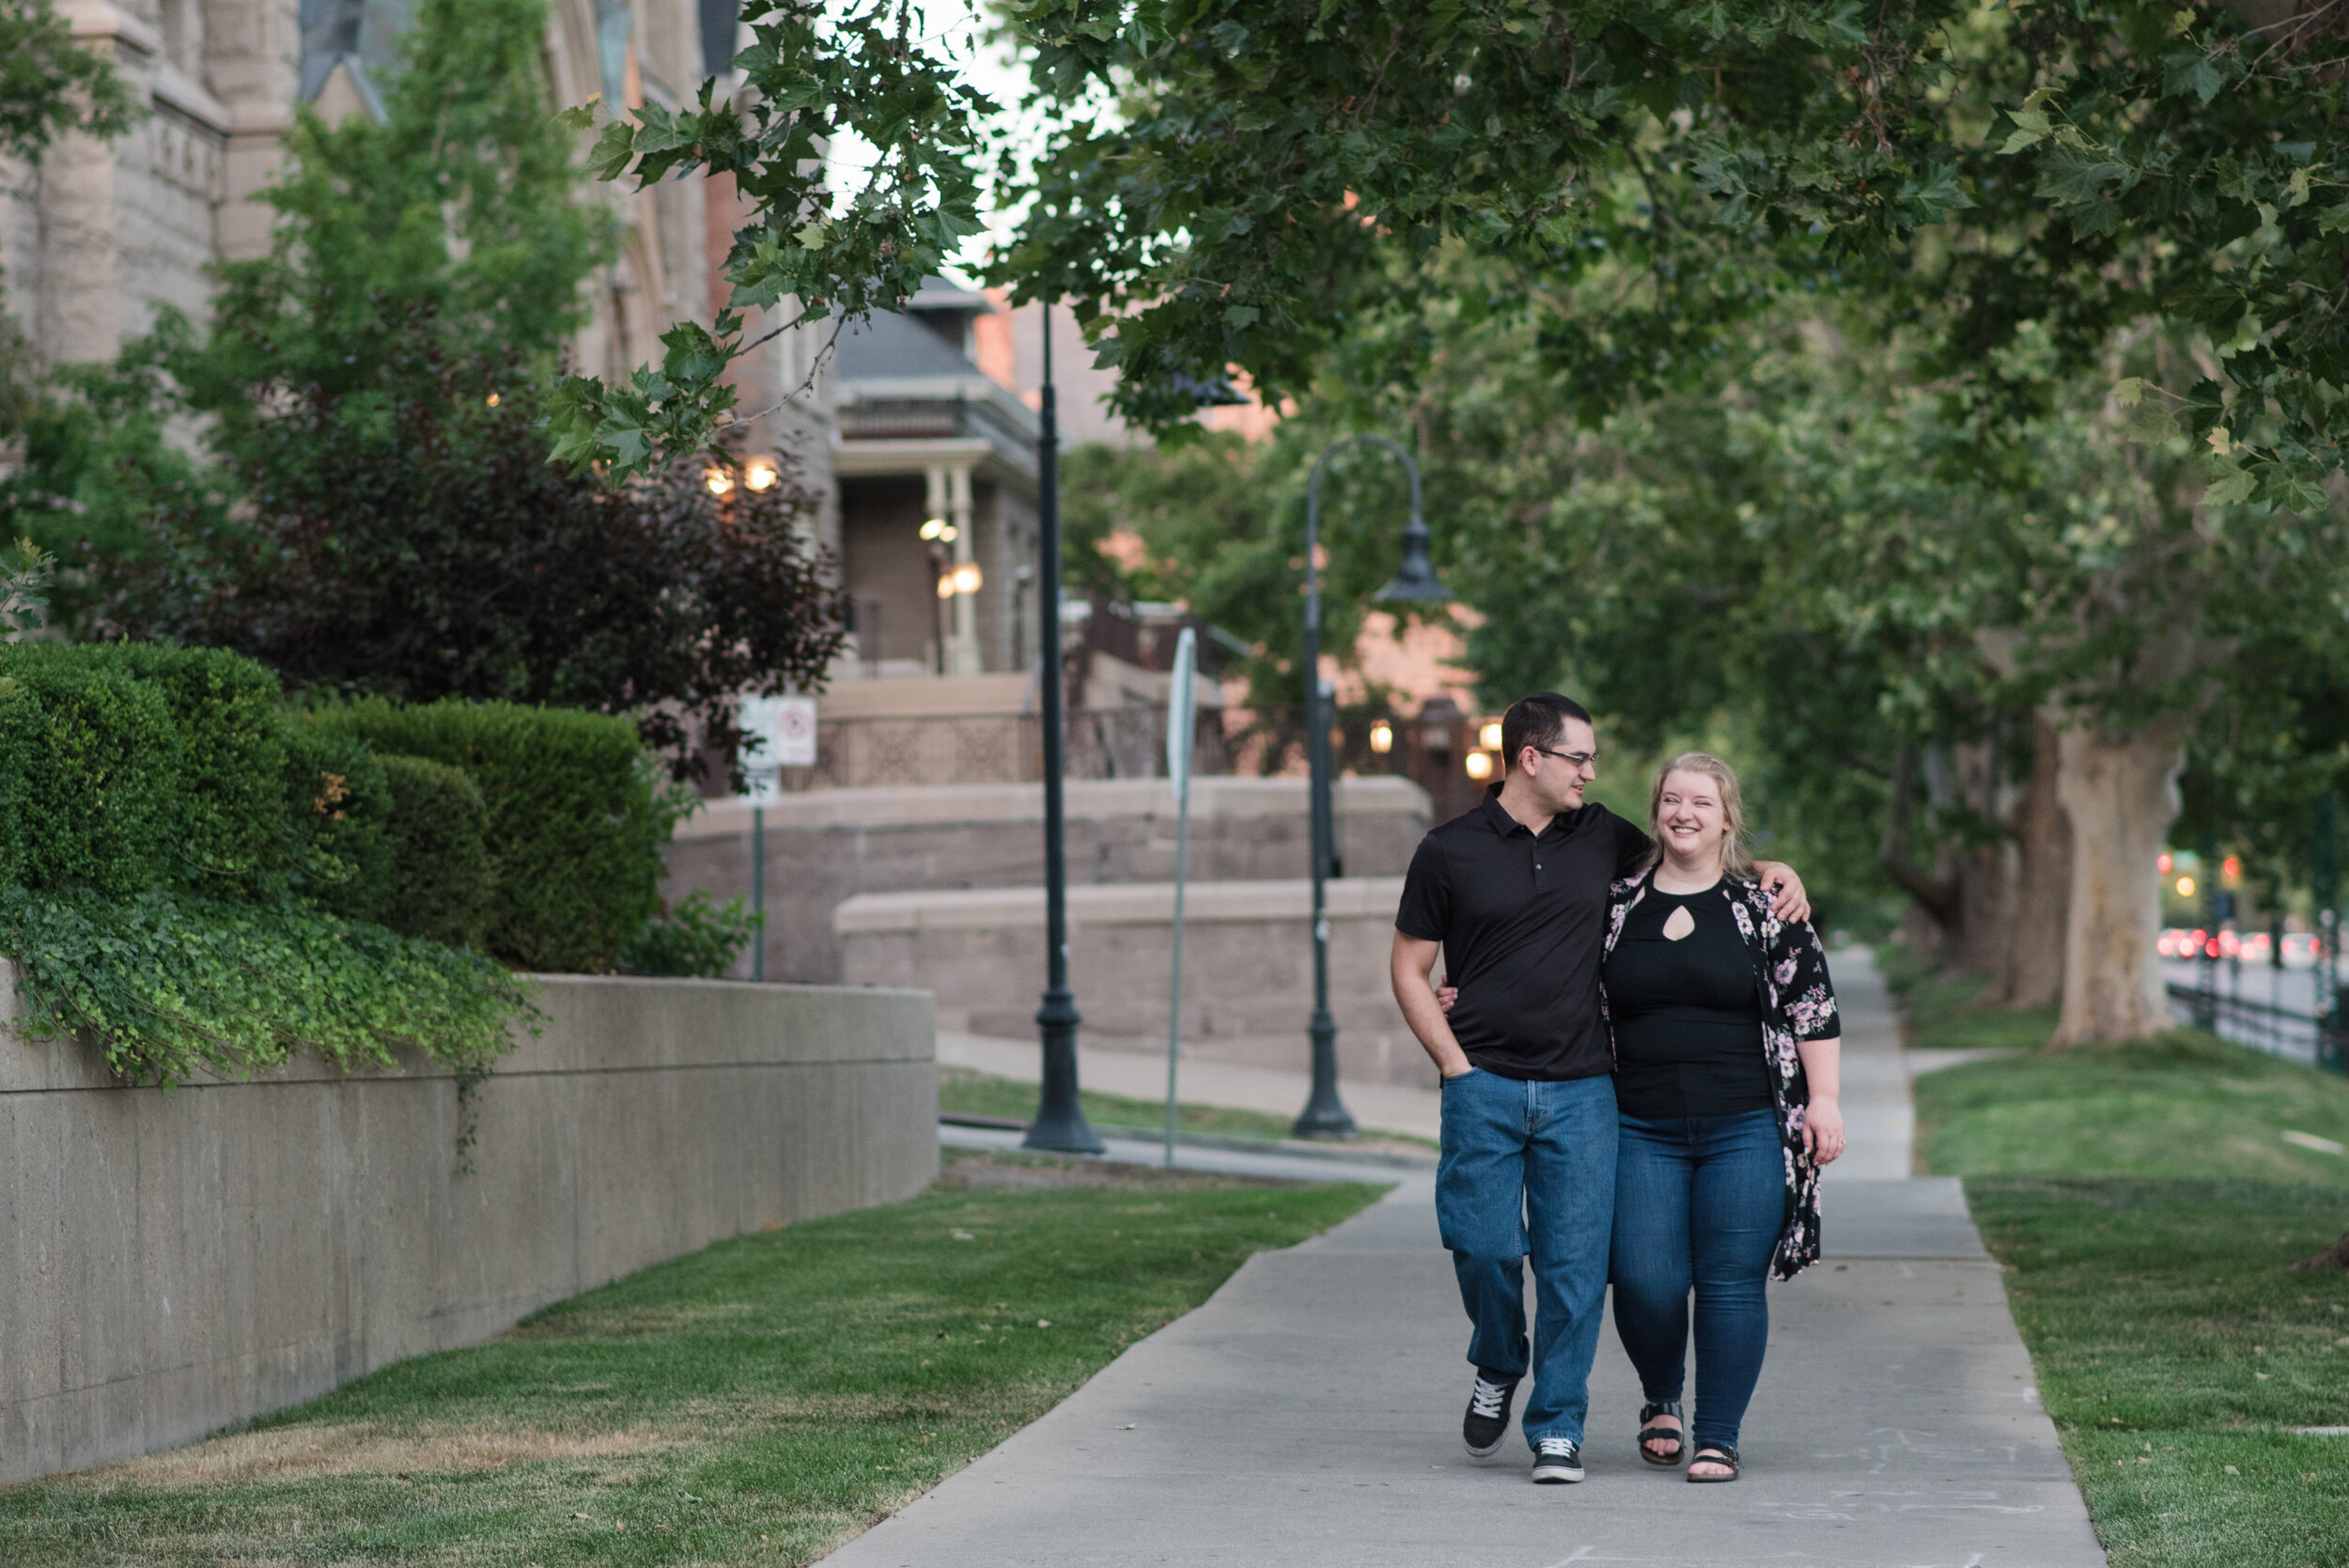 Utah_Wedding_Photographer_Engagement_Portraits_Cathedral_of_the_Madeline_Memory_Grove_Park 27.jpg